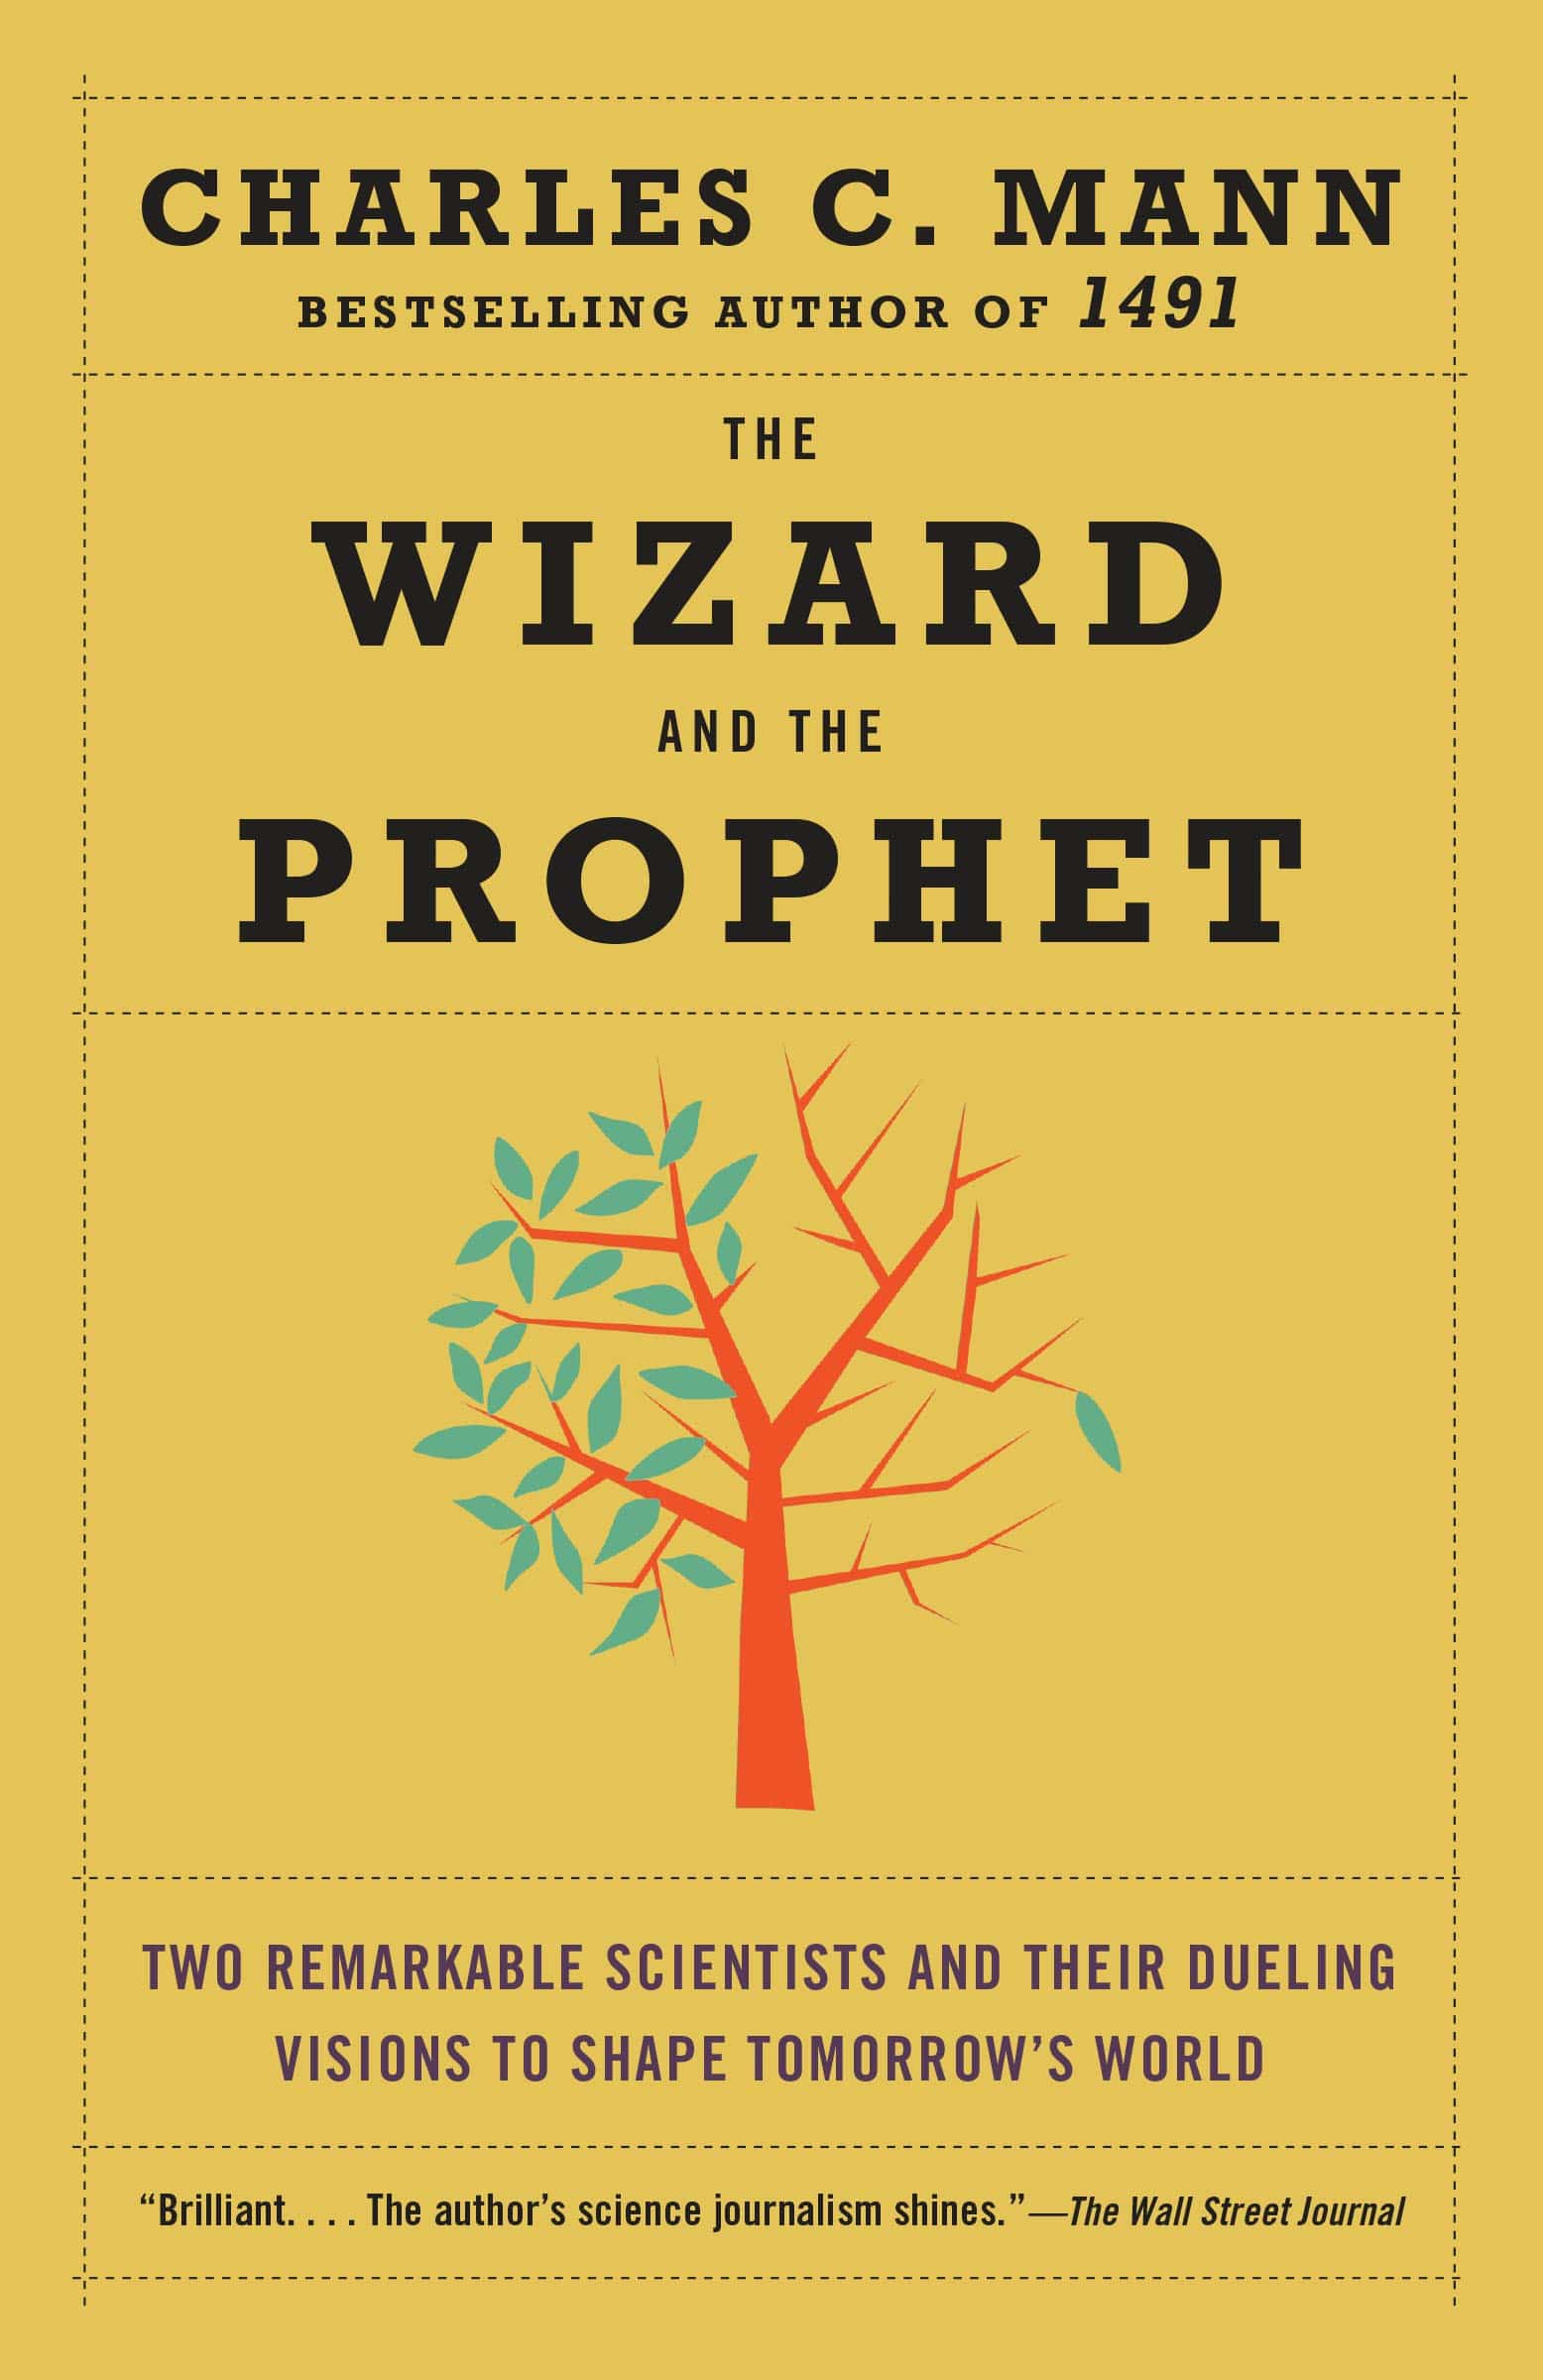 The cover of The Wizard and the Prophet